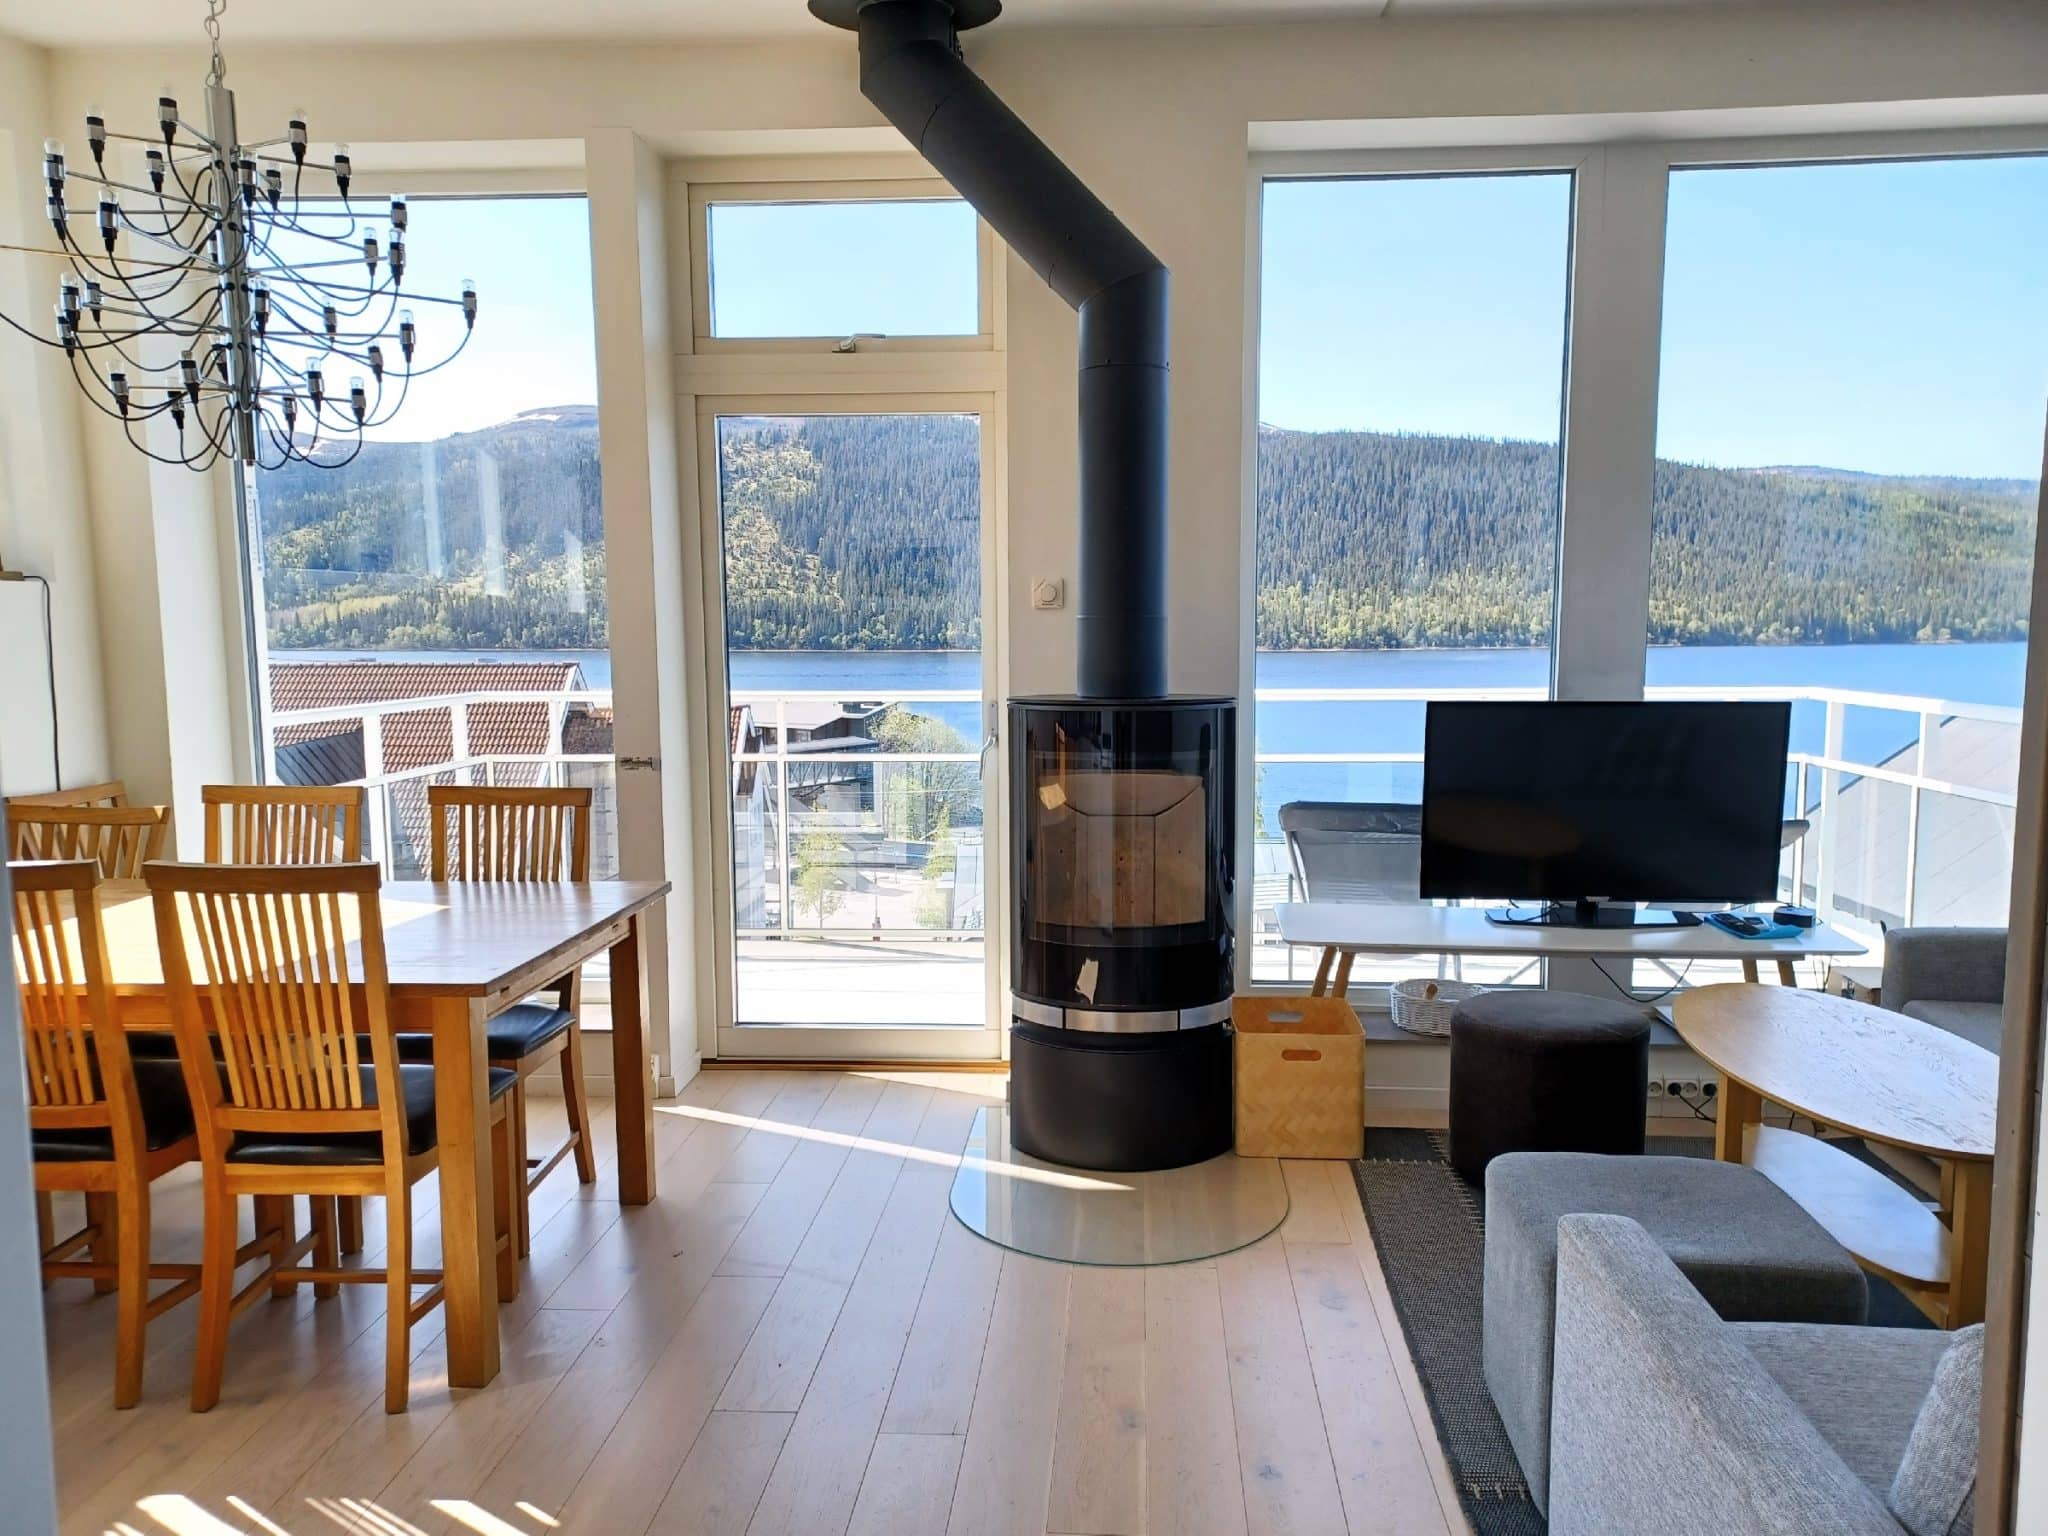 View of living room with panoramic window and wood stove